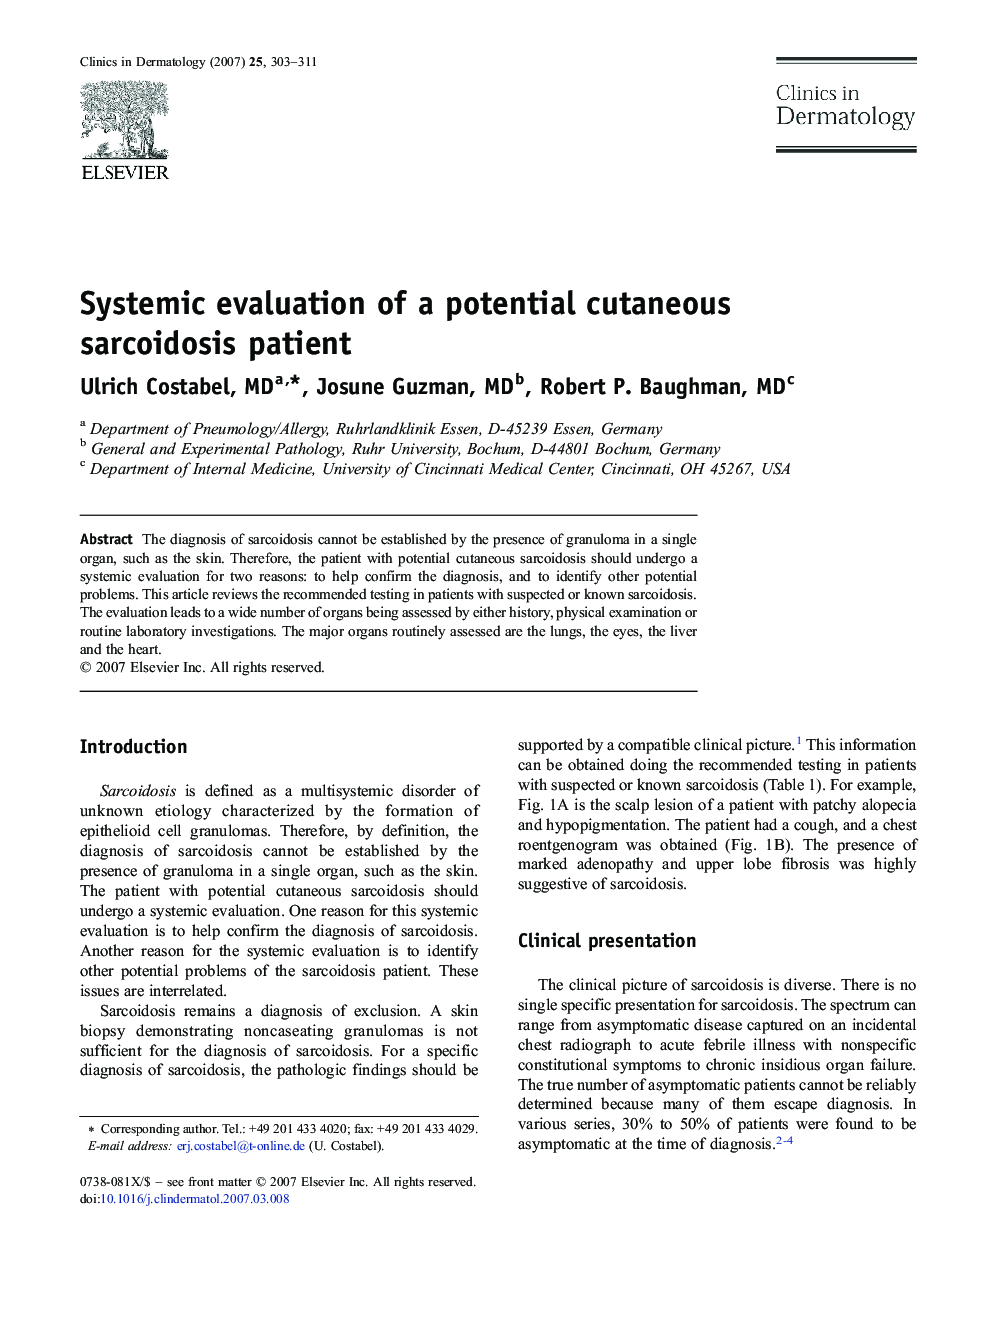 Systemic evaluation of a potential cutaneous sarcoidosis patient